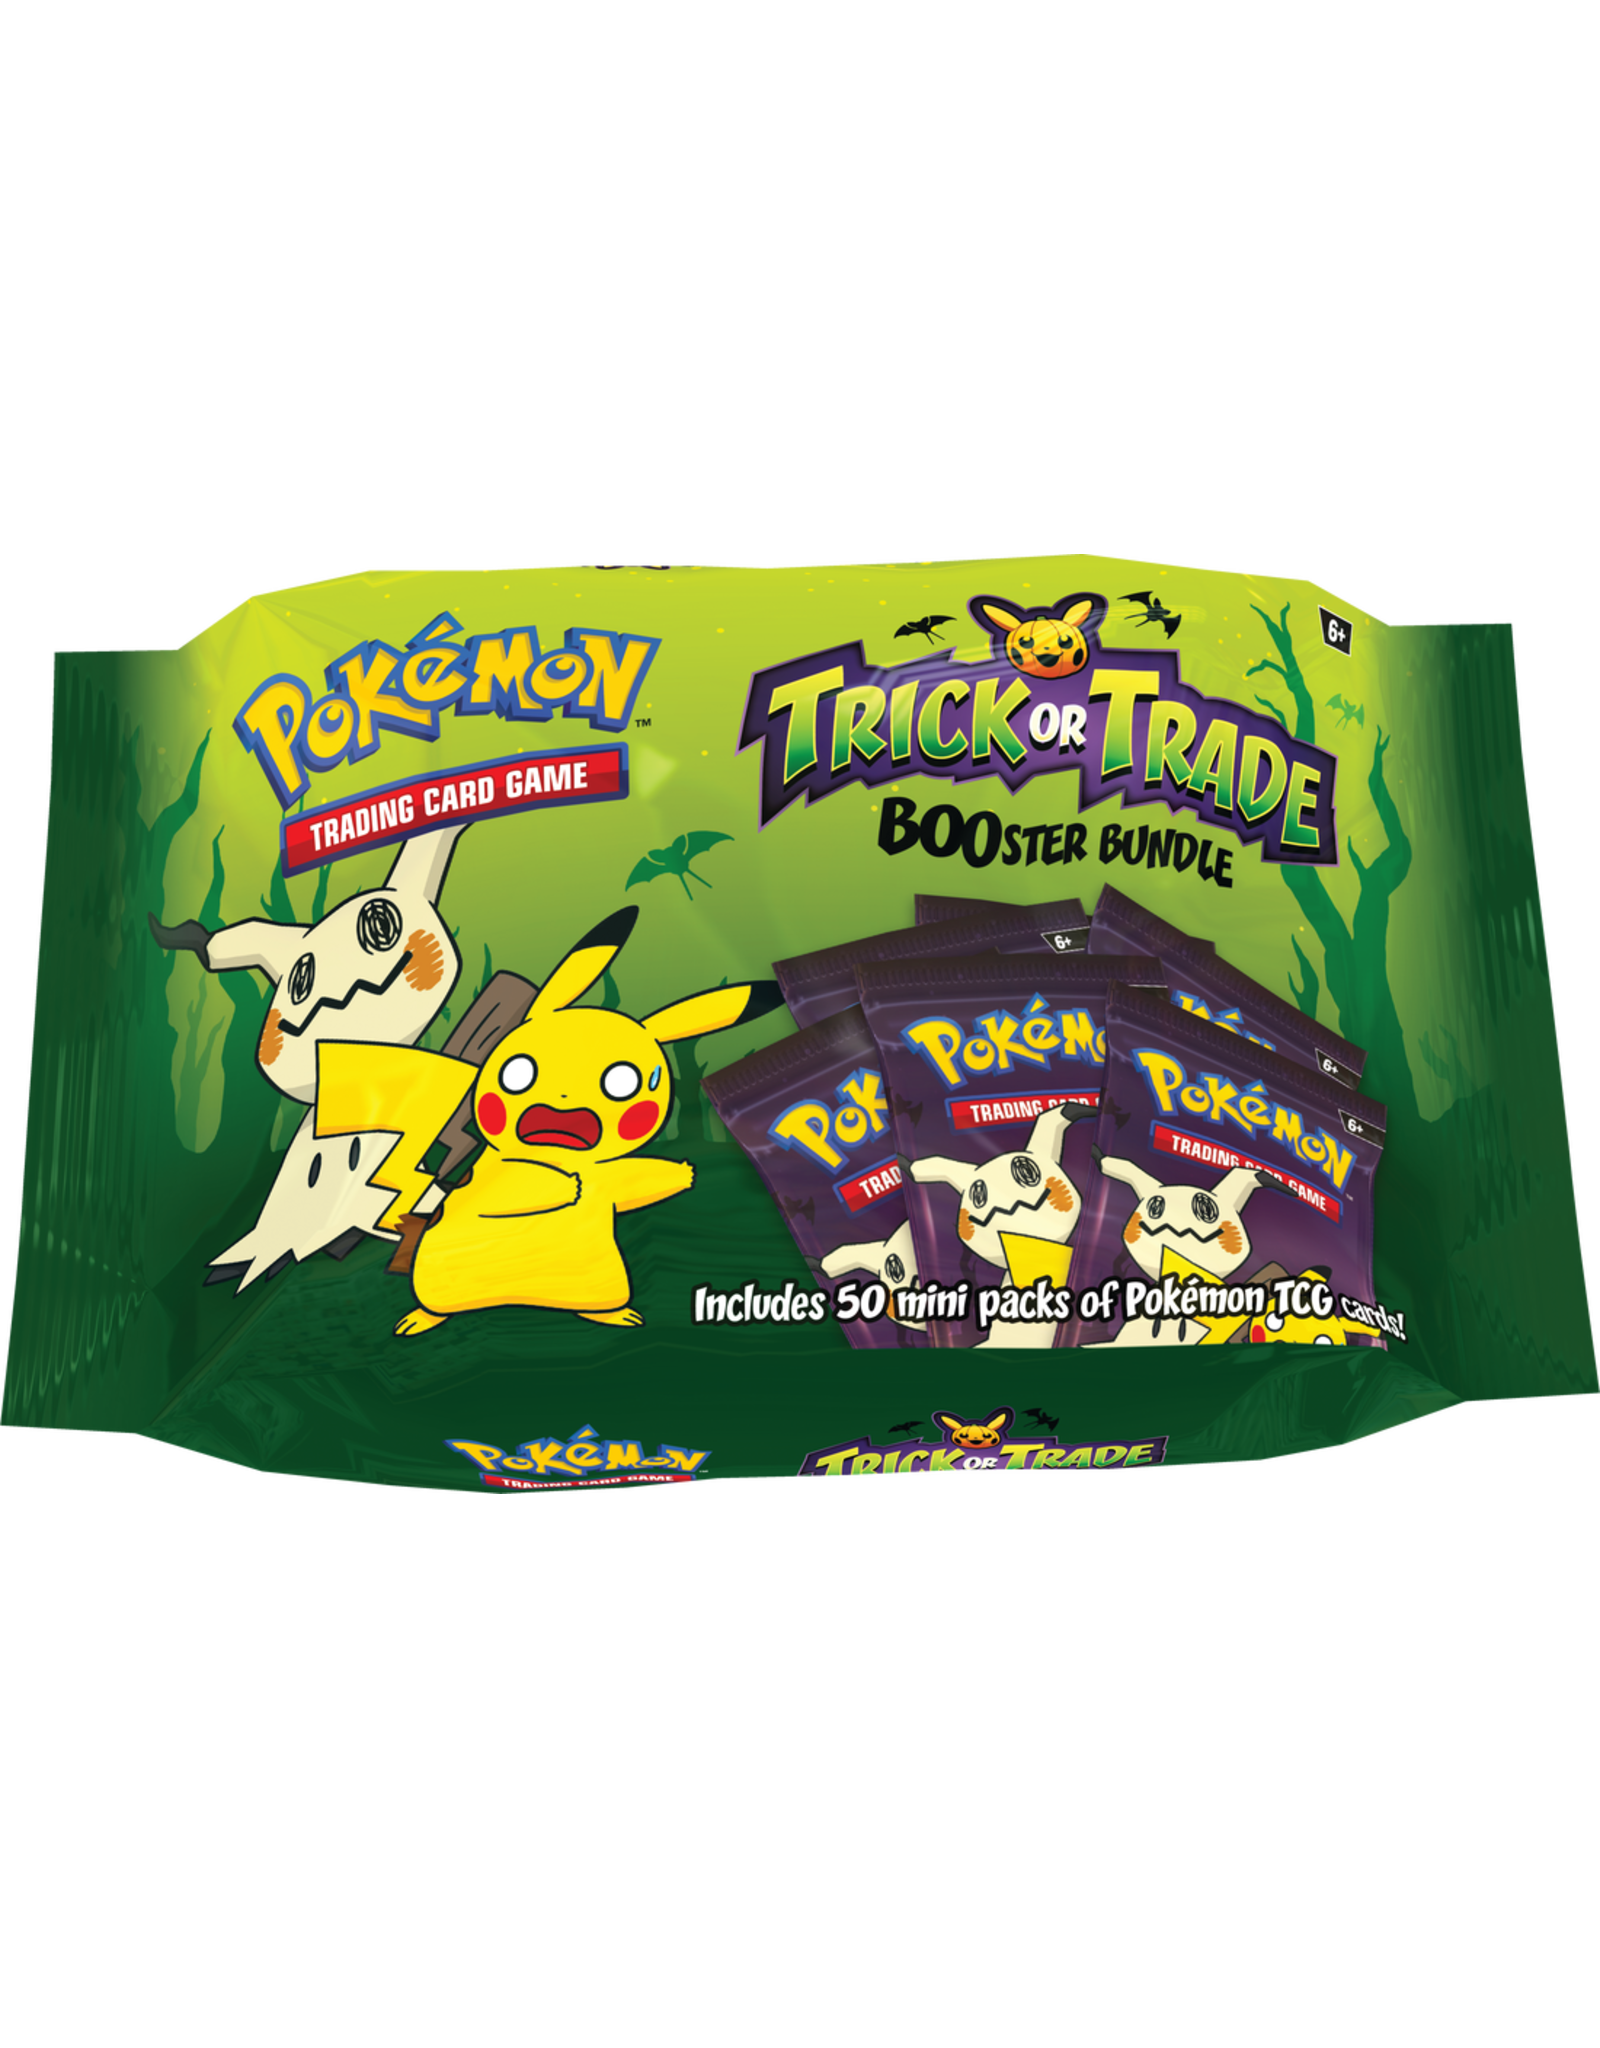 The Pokemon Company Pokémon Trading Card Game - 2023 Trick or Trade Booster Bundle